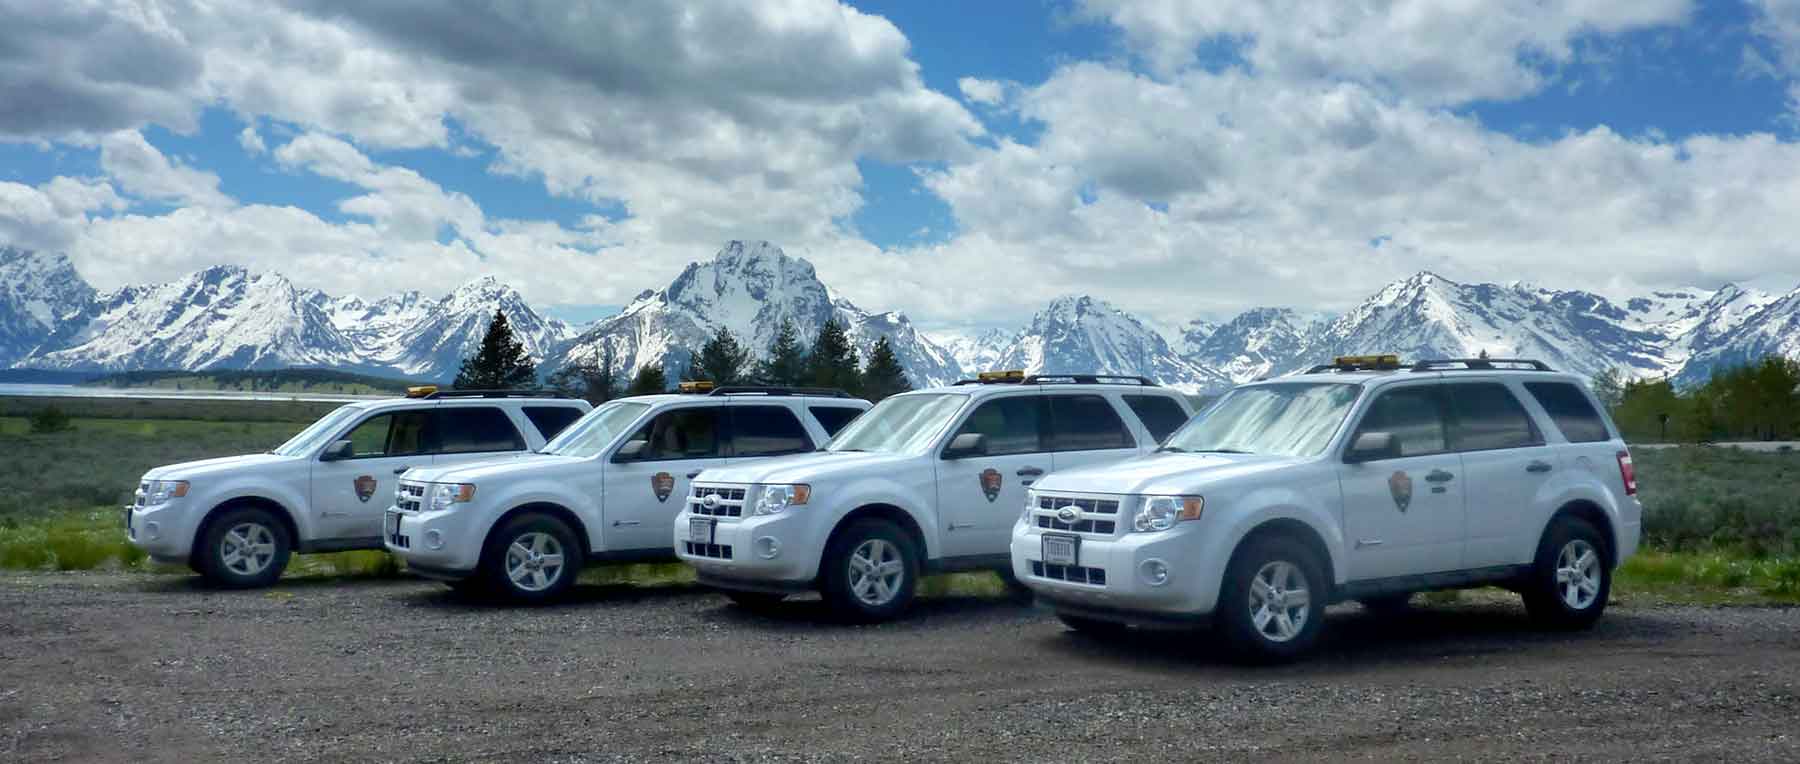 Photo of hybrid Ford Escape vehicles at Grand Teton National Park